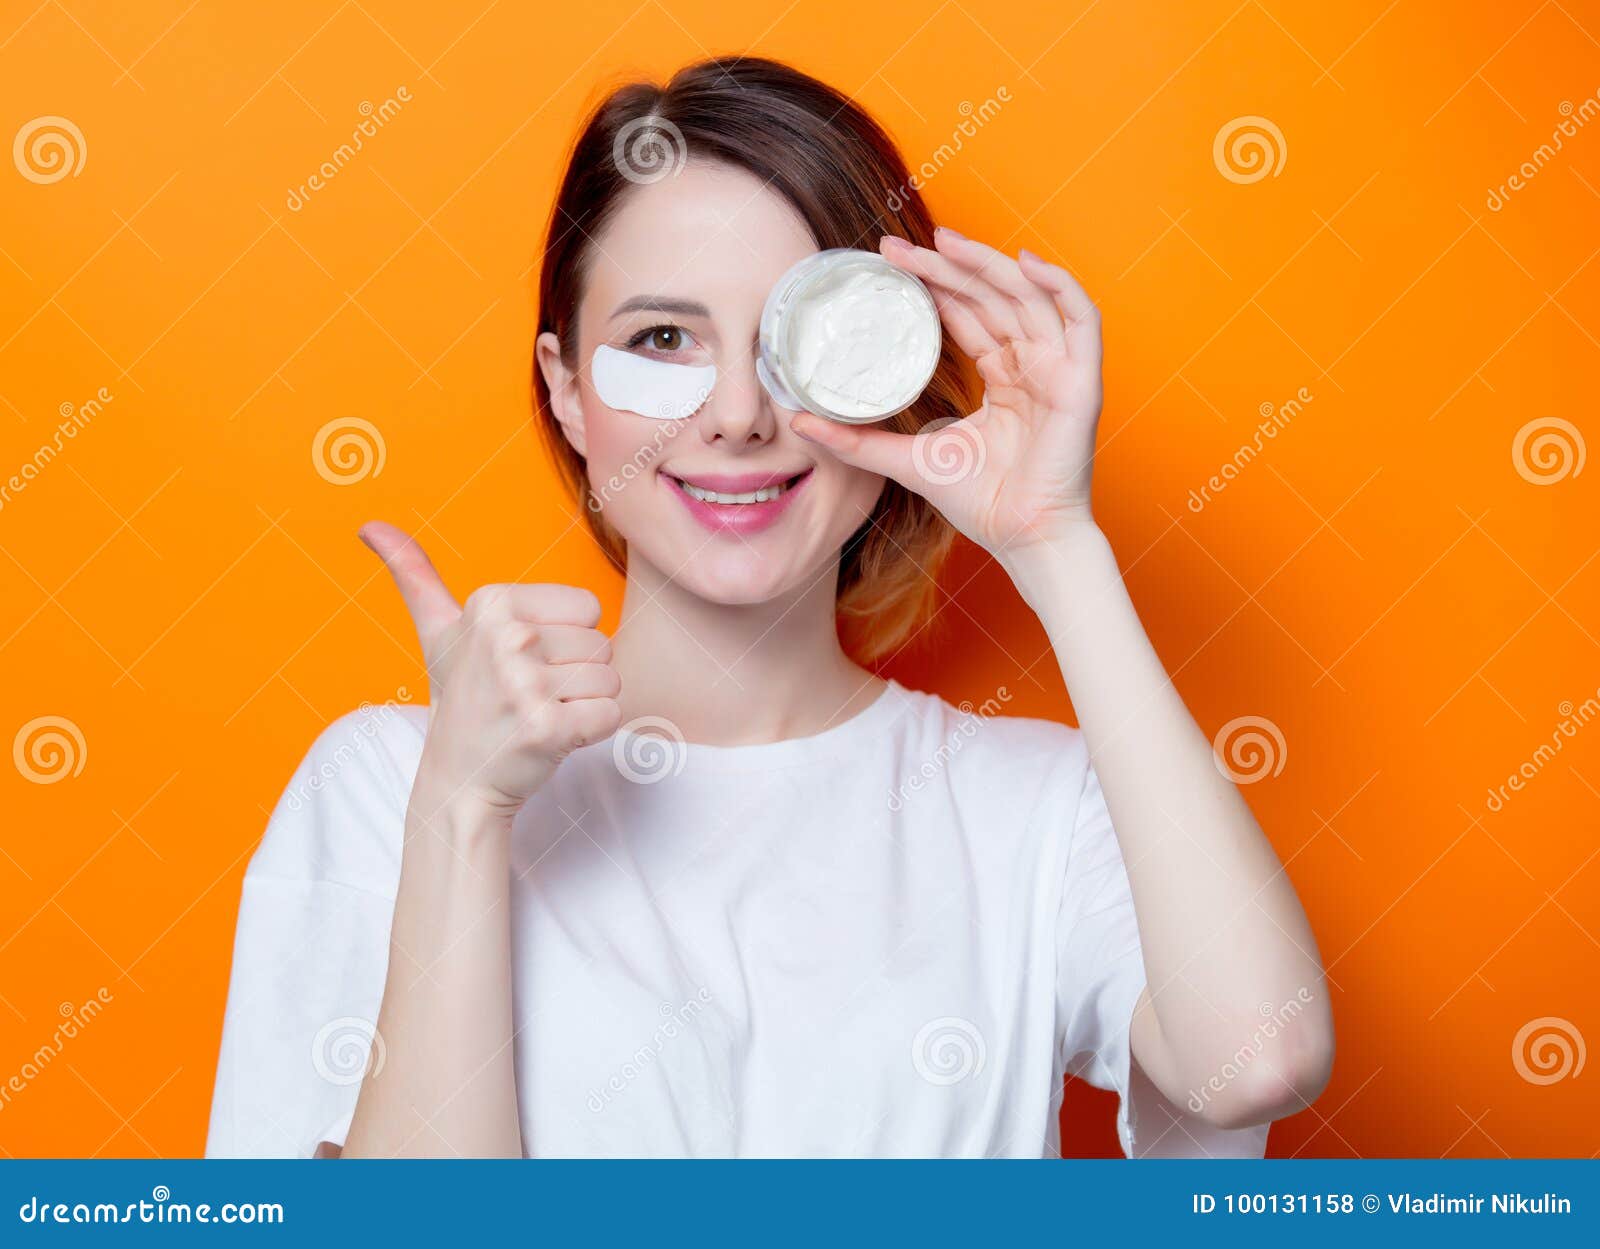 woman using eye patch for her eyes and holding cream